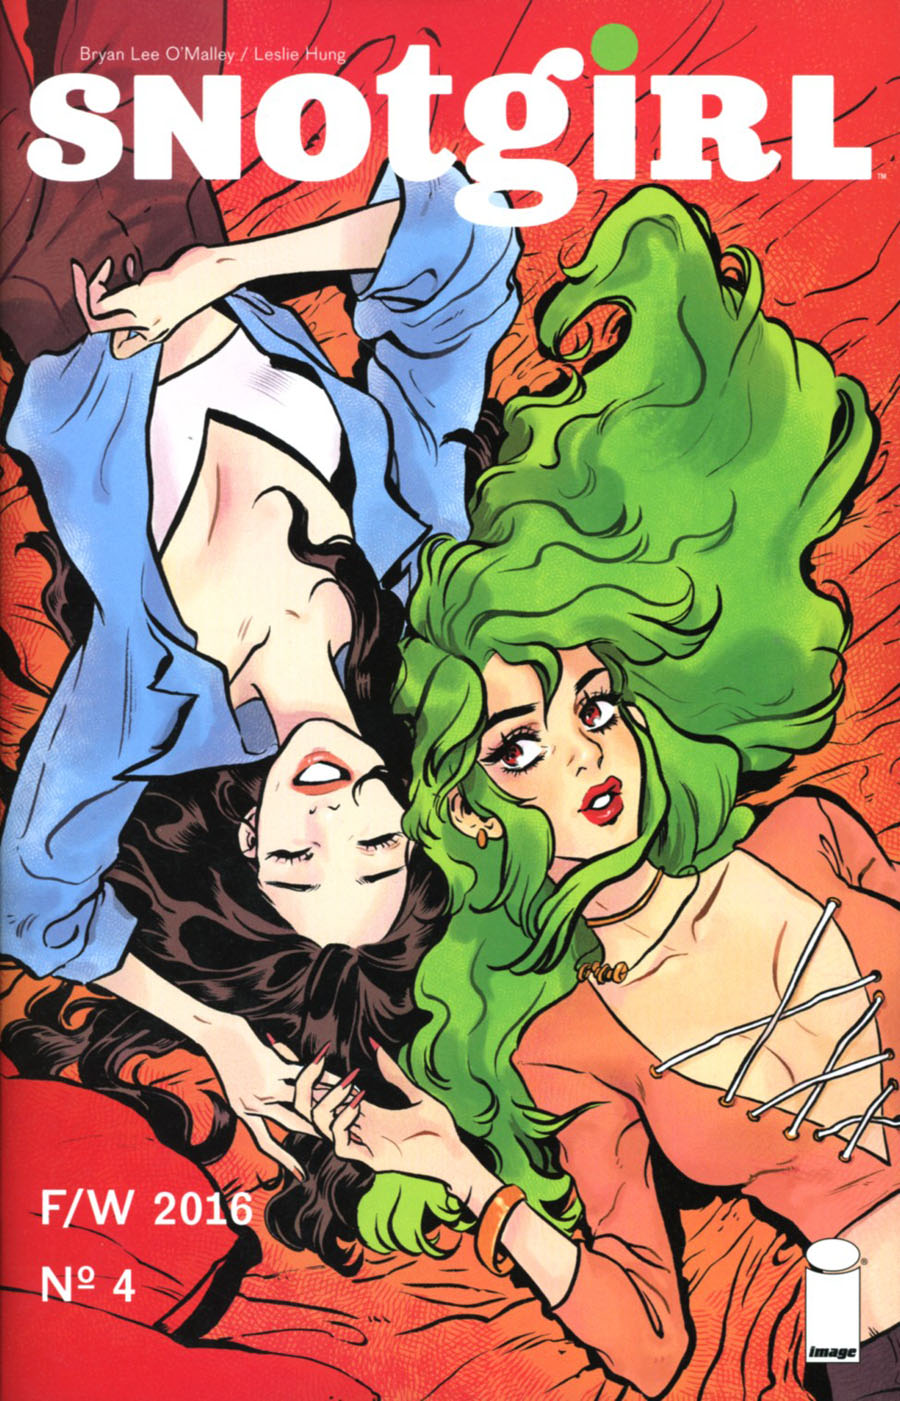 Snotgirl #4 Cover A Leslie Hung